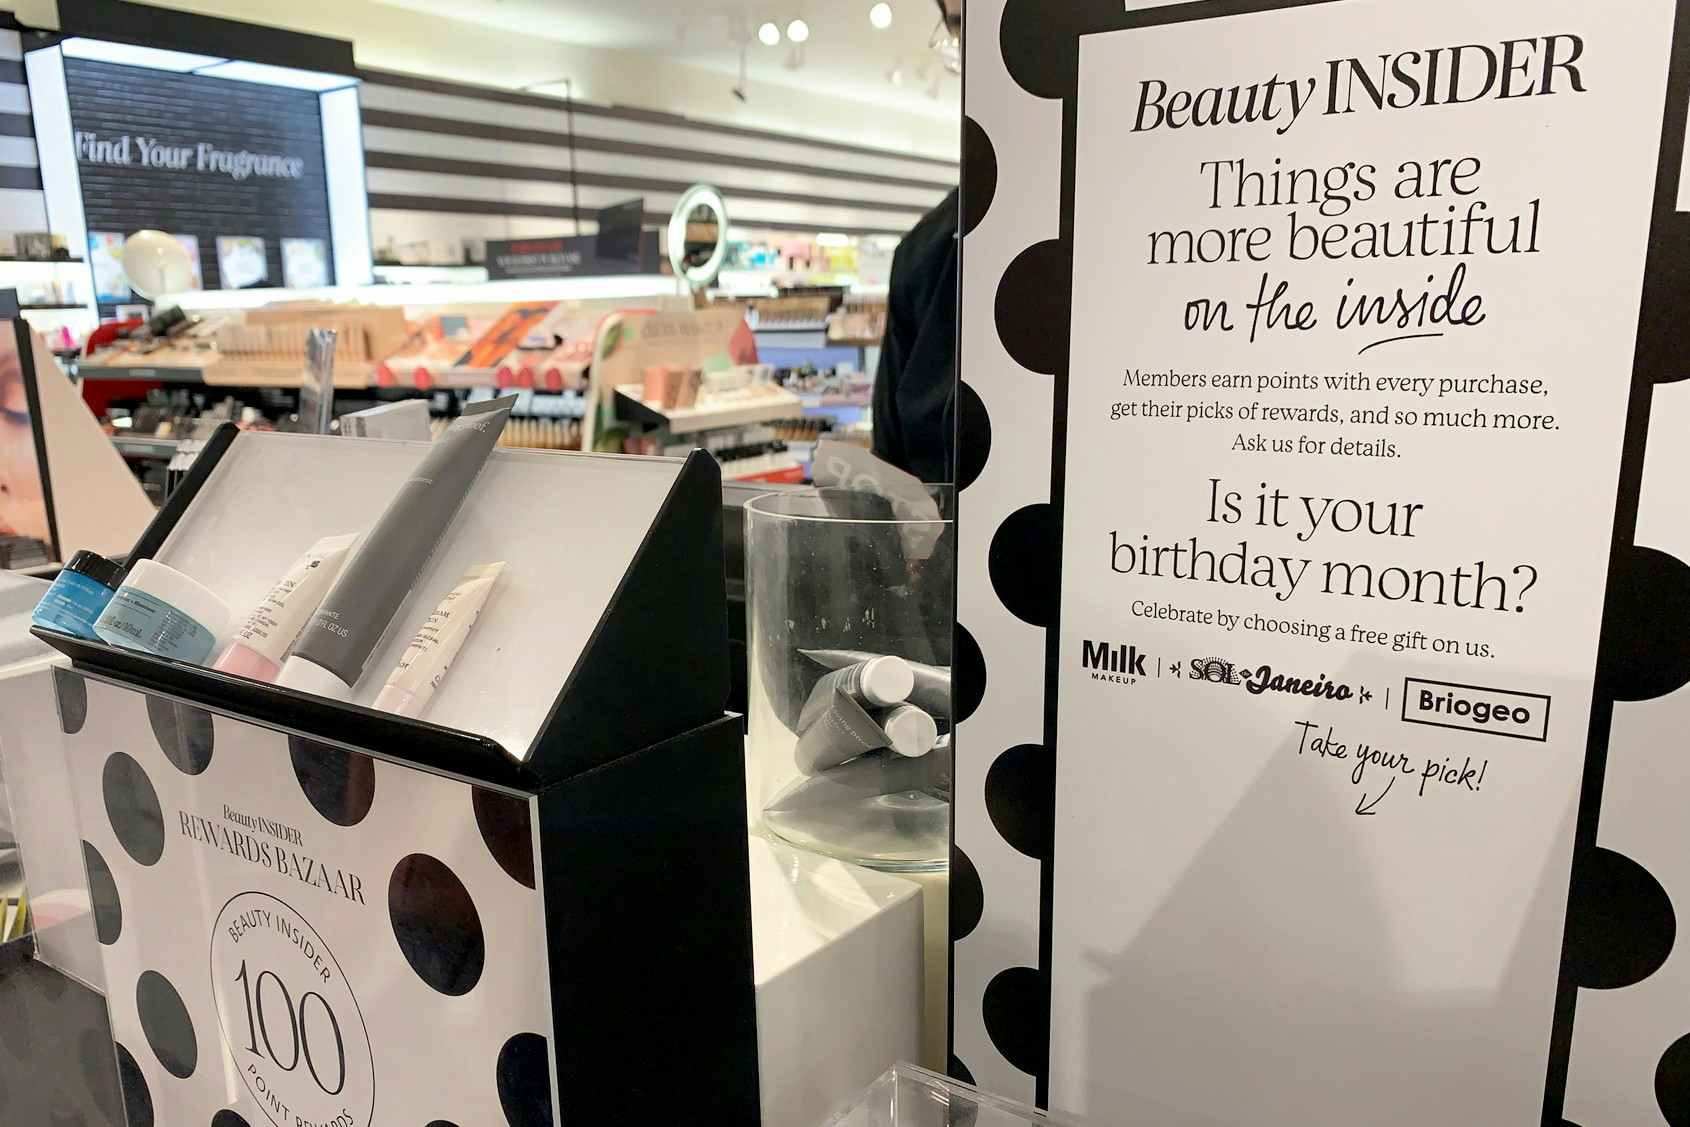 A sign advertising Beauty Insider program with Sephora products available to customers with redemption of rewards points.